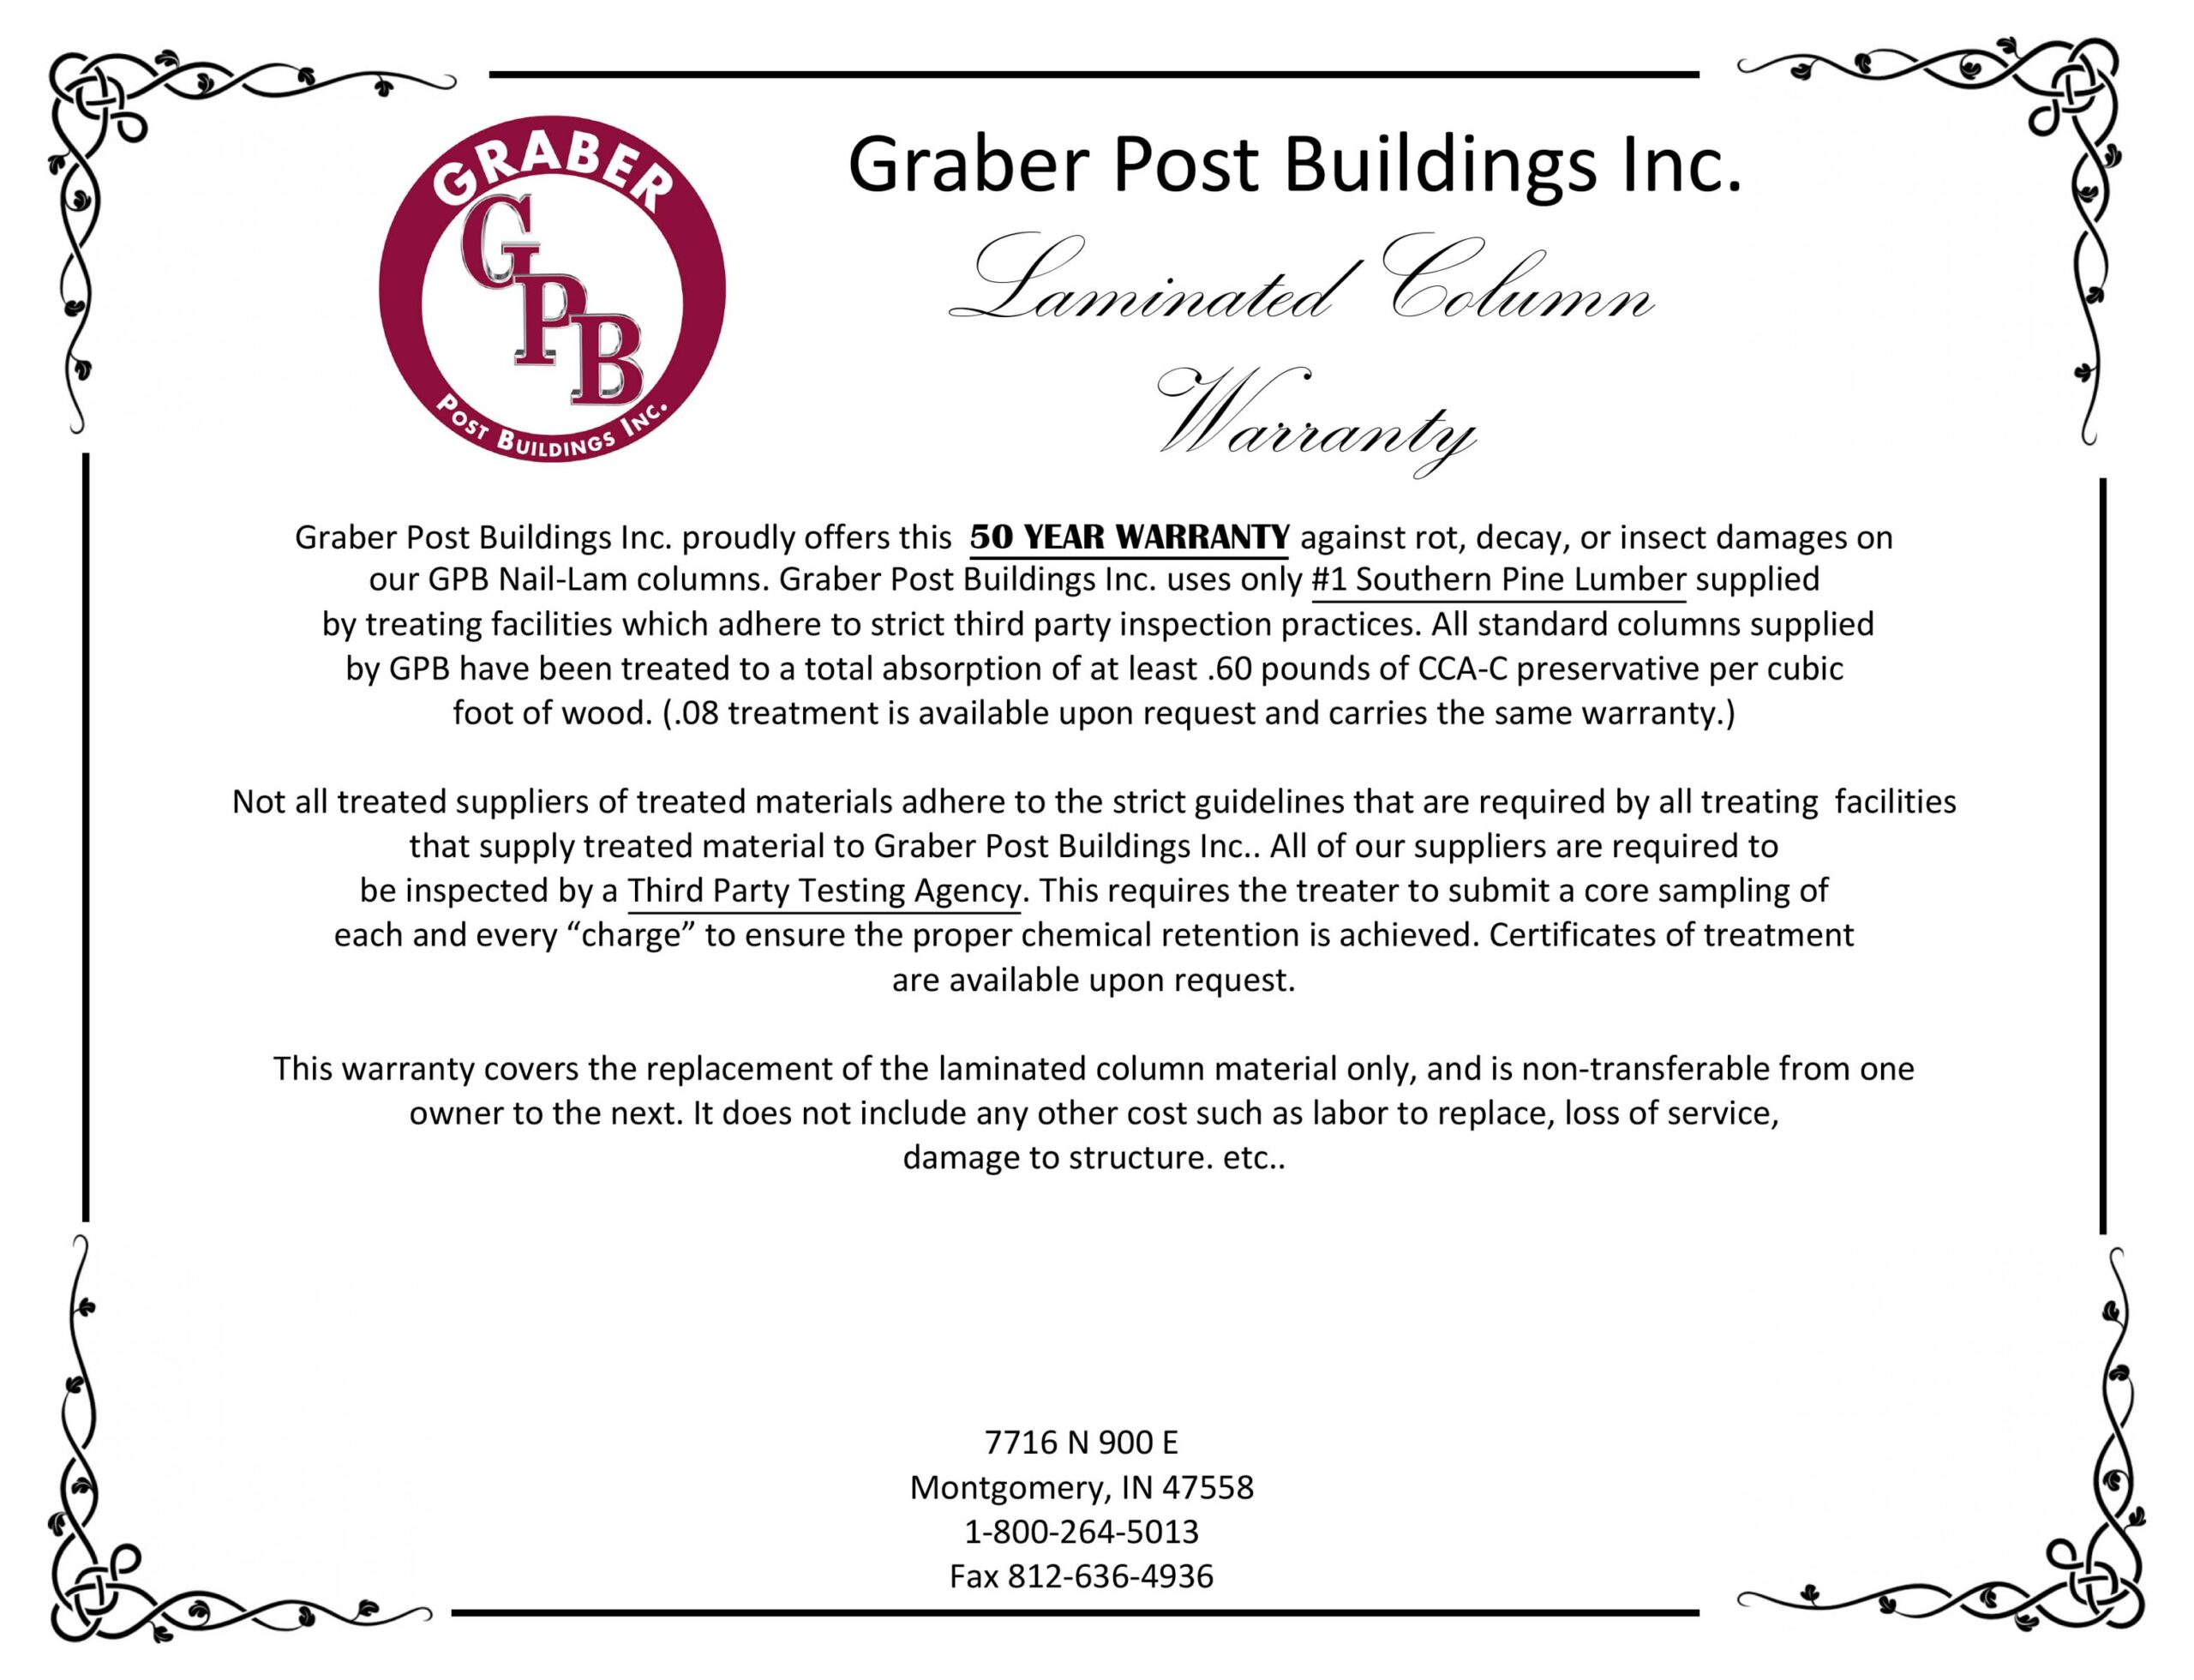 Graber post warranty information for products offered through Heartland Metal and Building Supplies